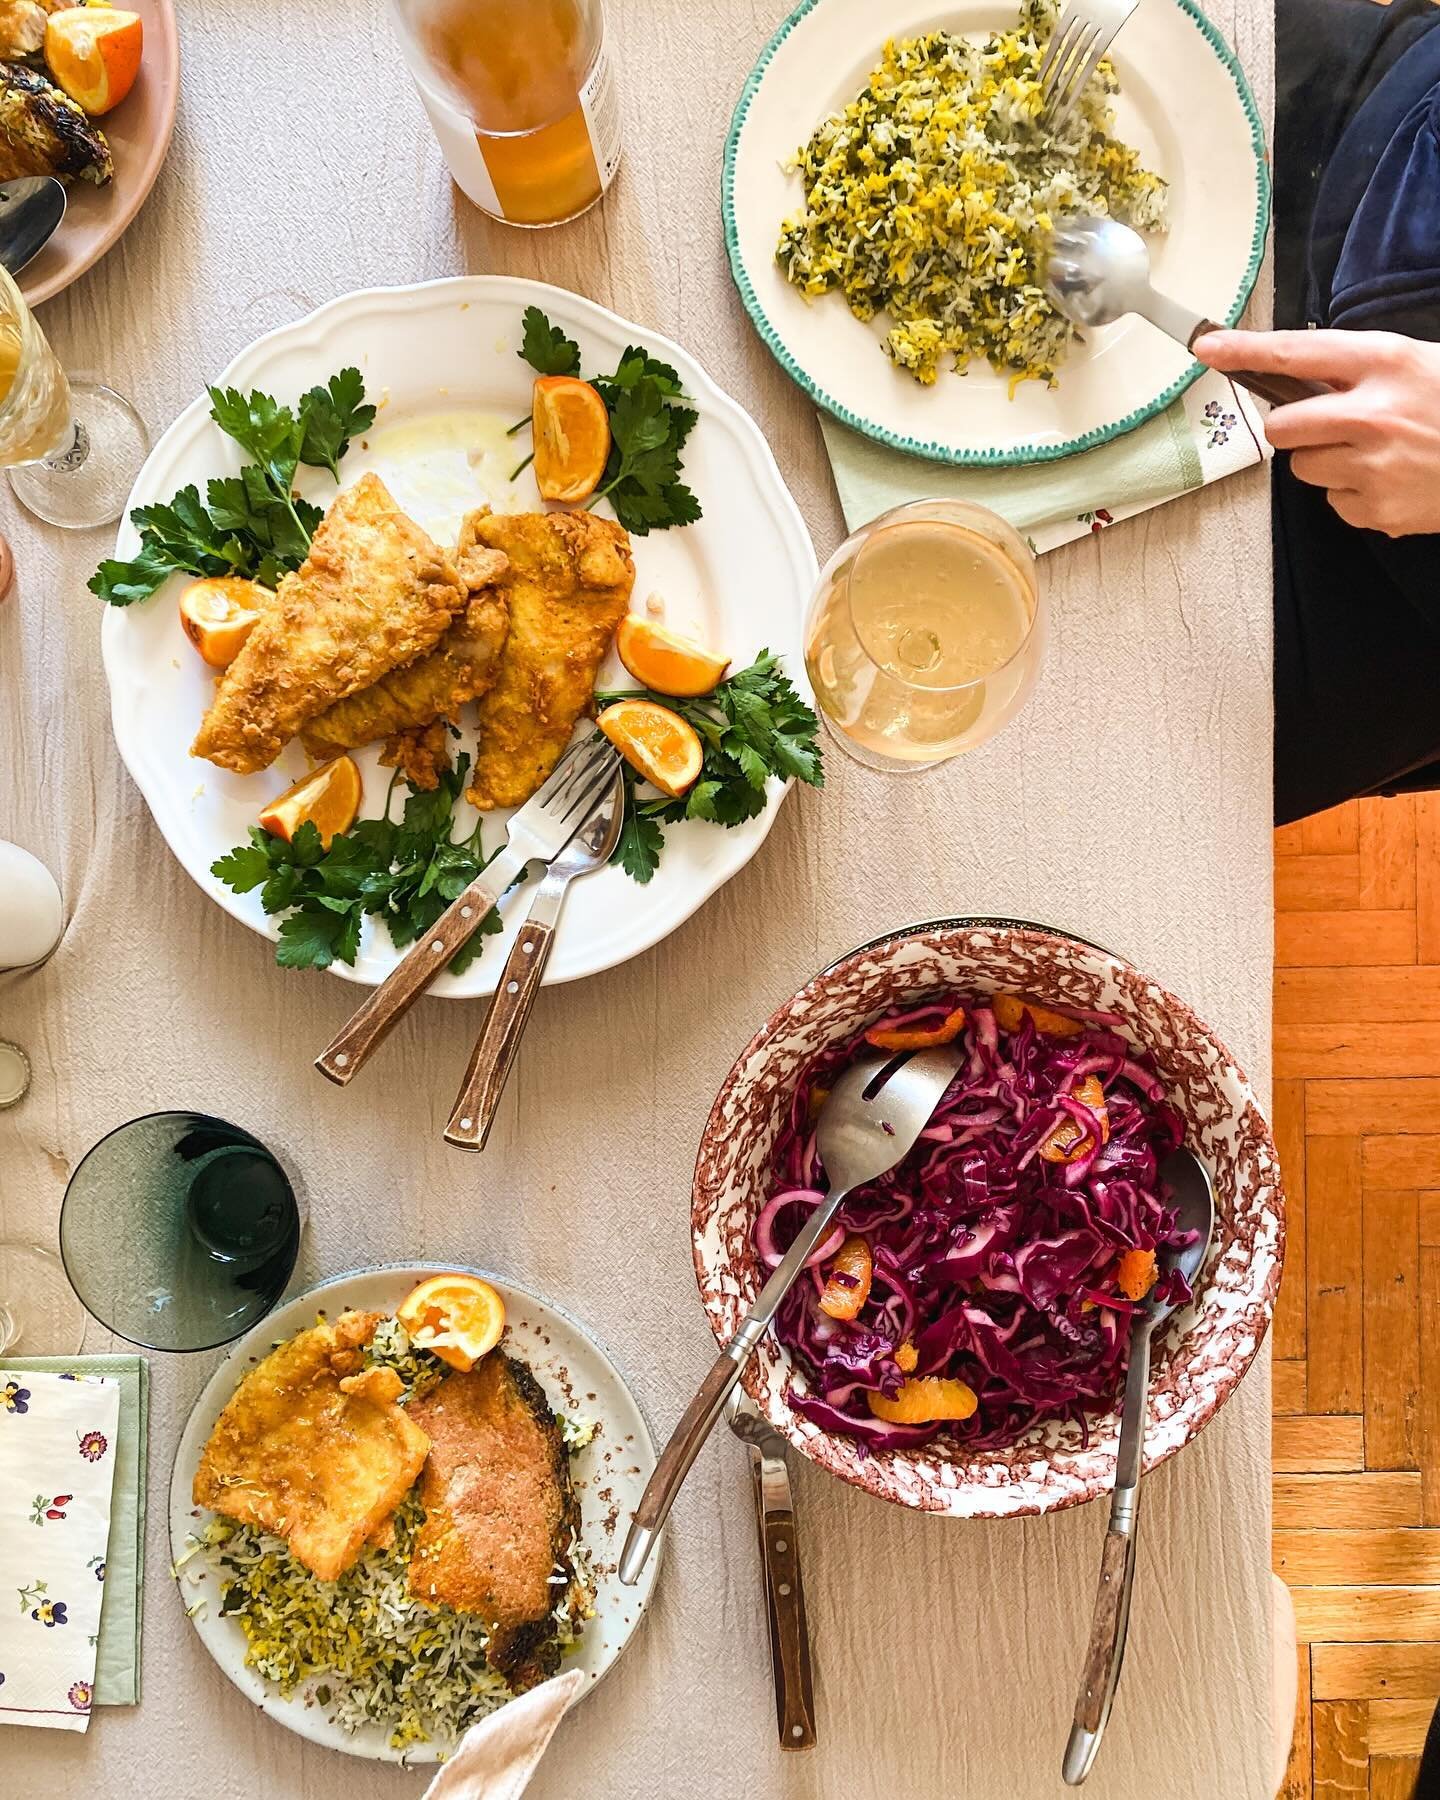 Leaving this one on the grid because it's been a special one.

Haft-seen table and a classic sabzi polo mahi with gorgeous fried fish in a turmeric breading.
Sunlight, spring, beautiful food, wine and people.

Nowruz mobarak, from our home to you,
Lo